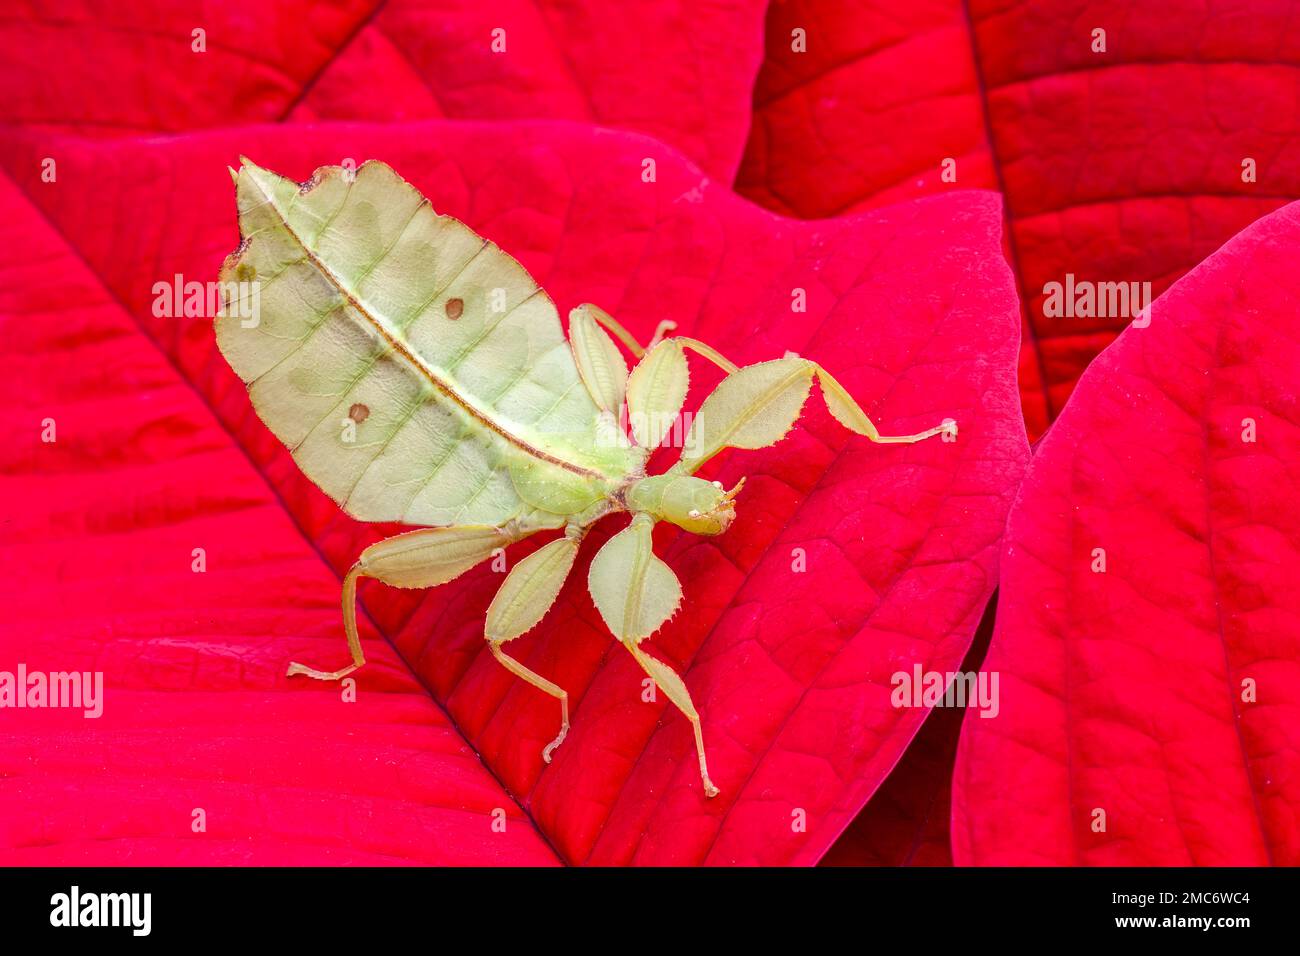 Leaf insect on poinsettia. Stock Photo